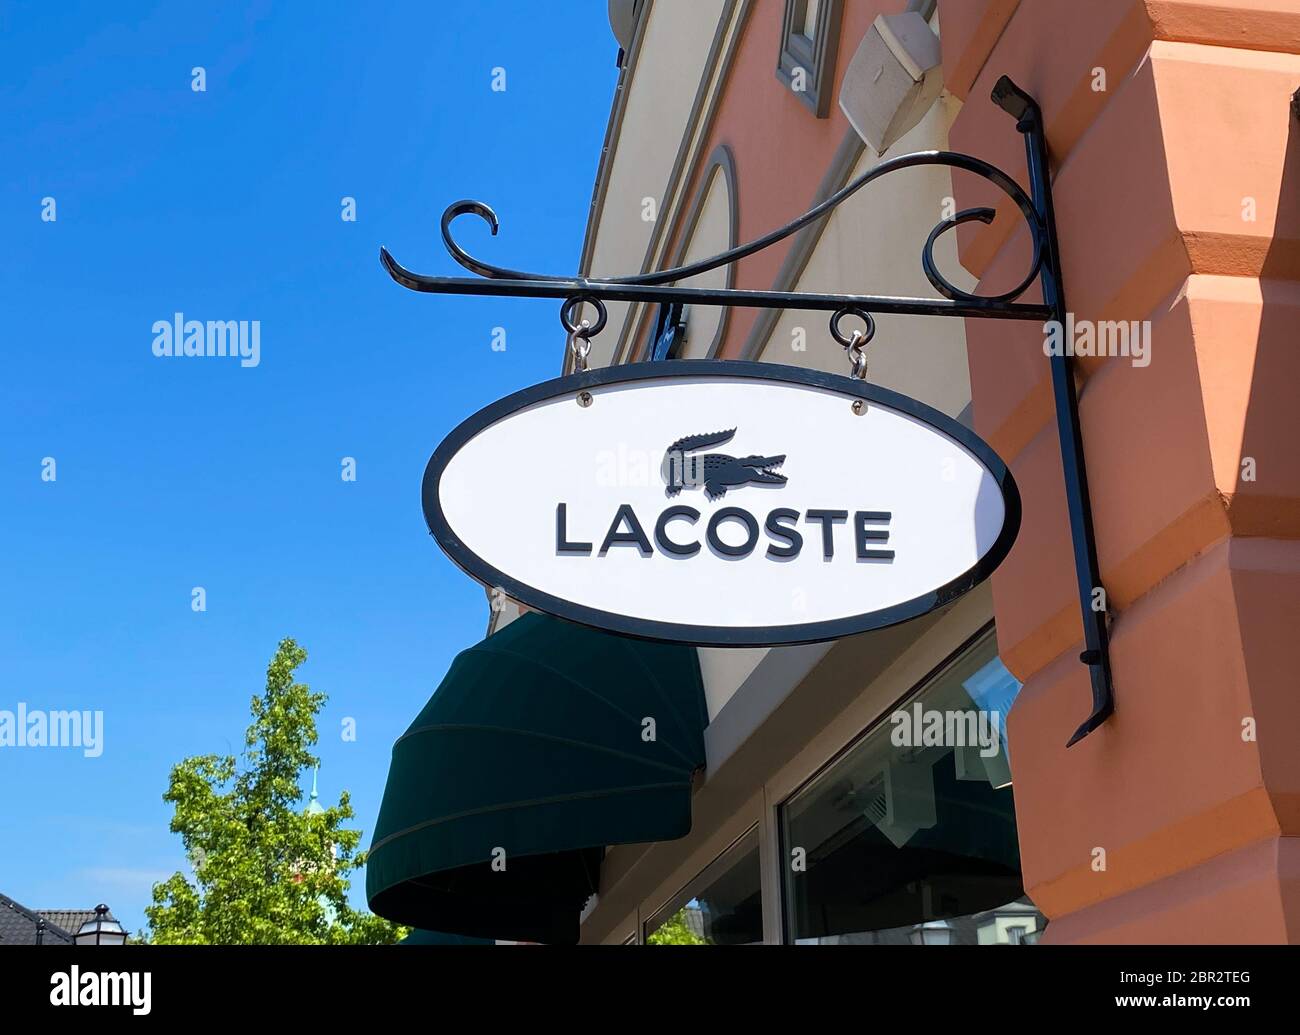 Roermond, Netherlands - May 19. 2020: View on logo lettering of French Lacoste company at shop entrance Stock Photo